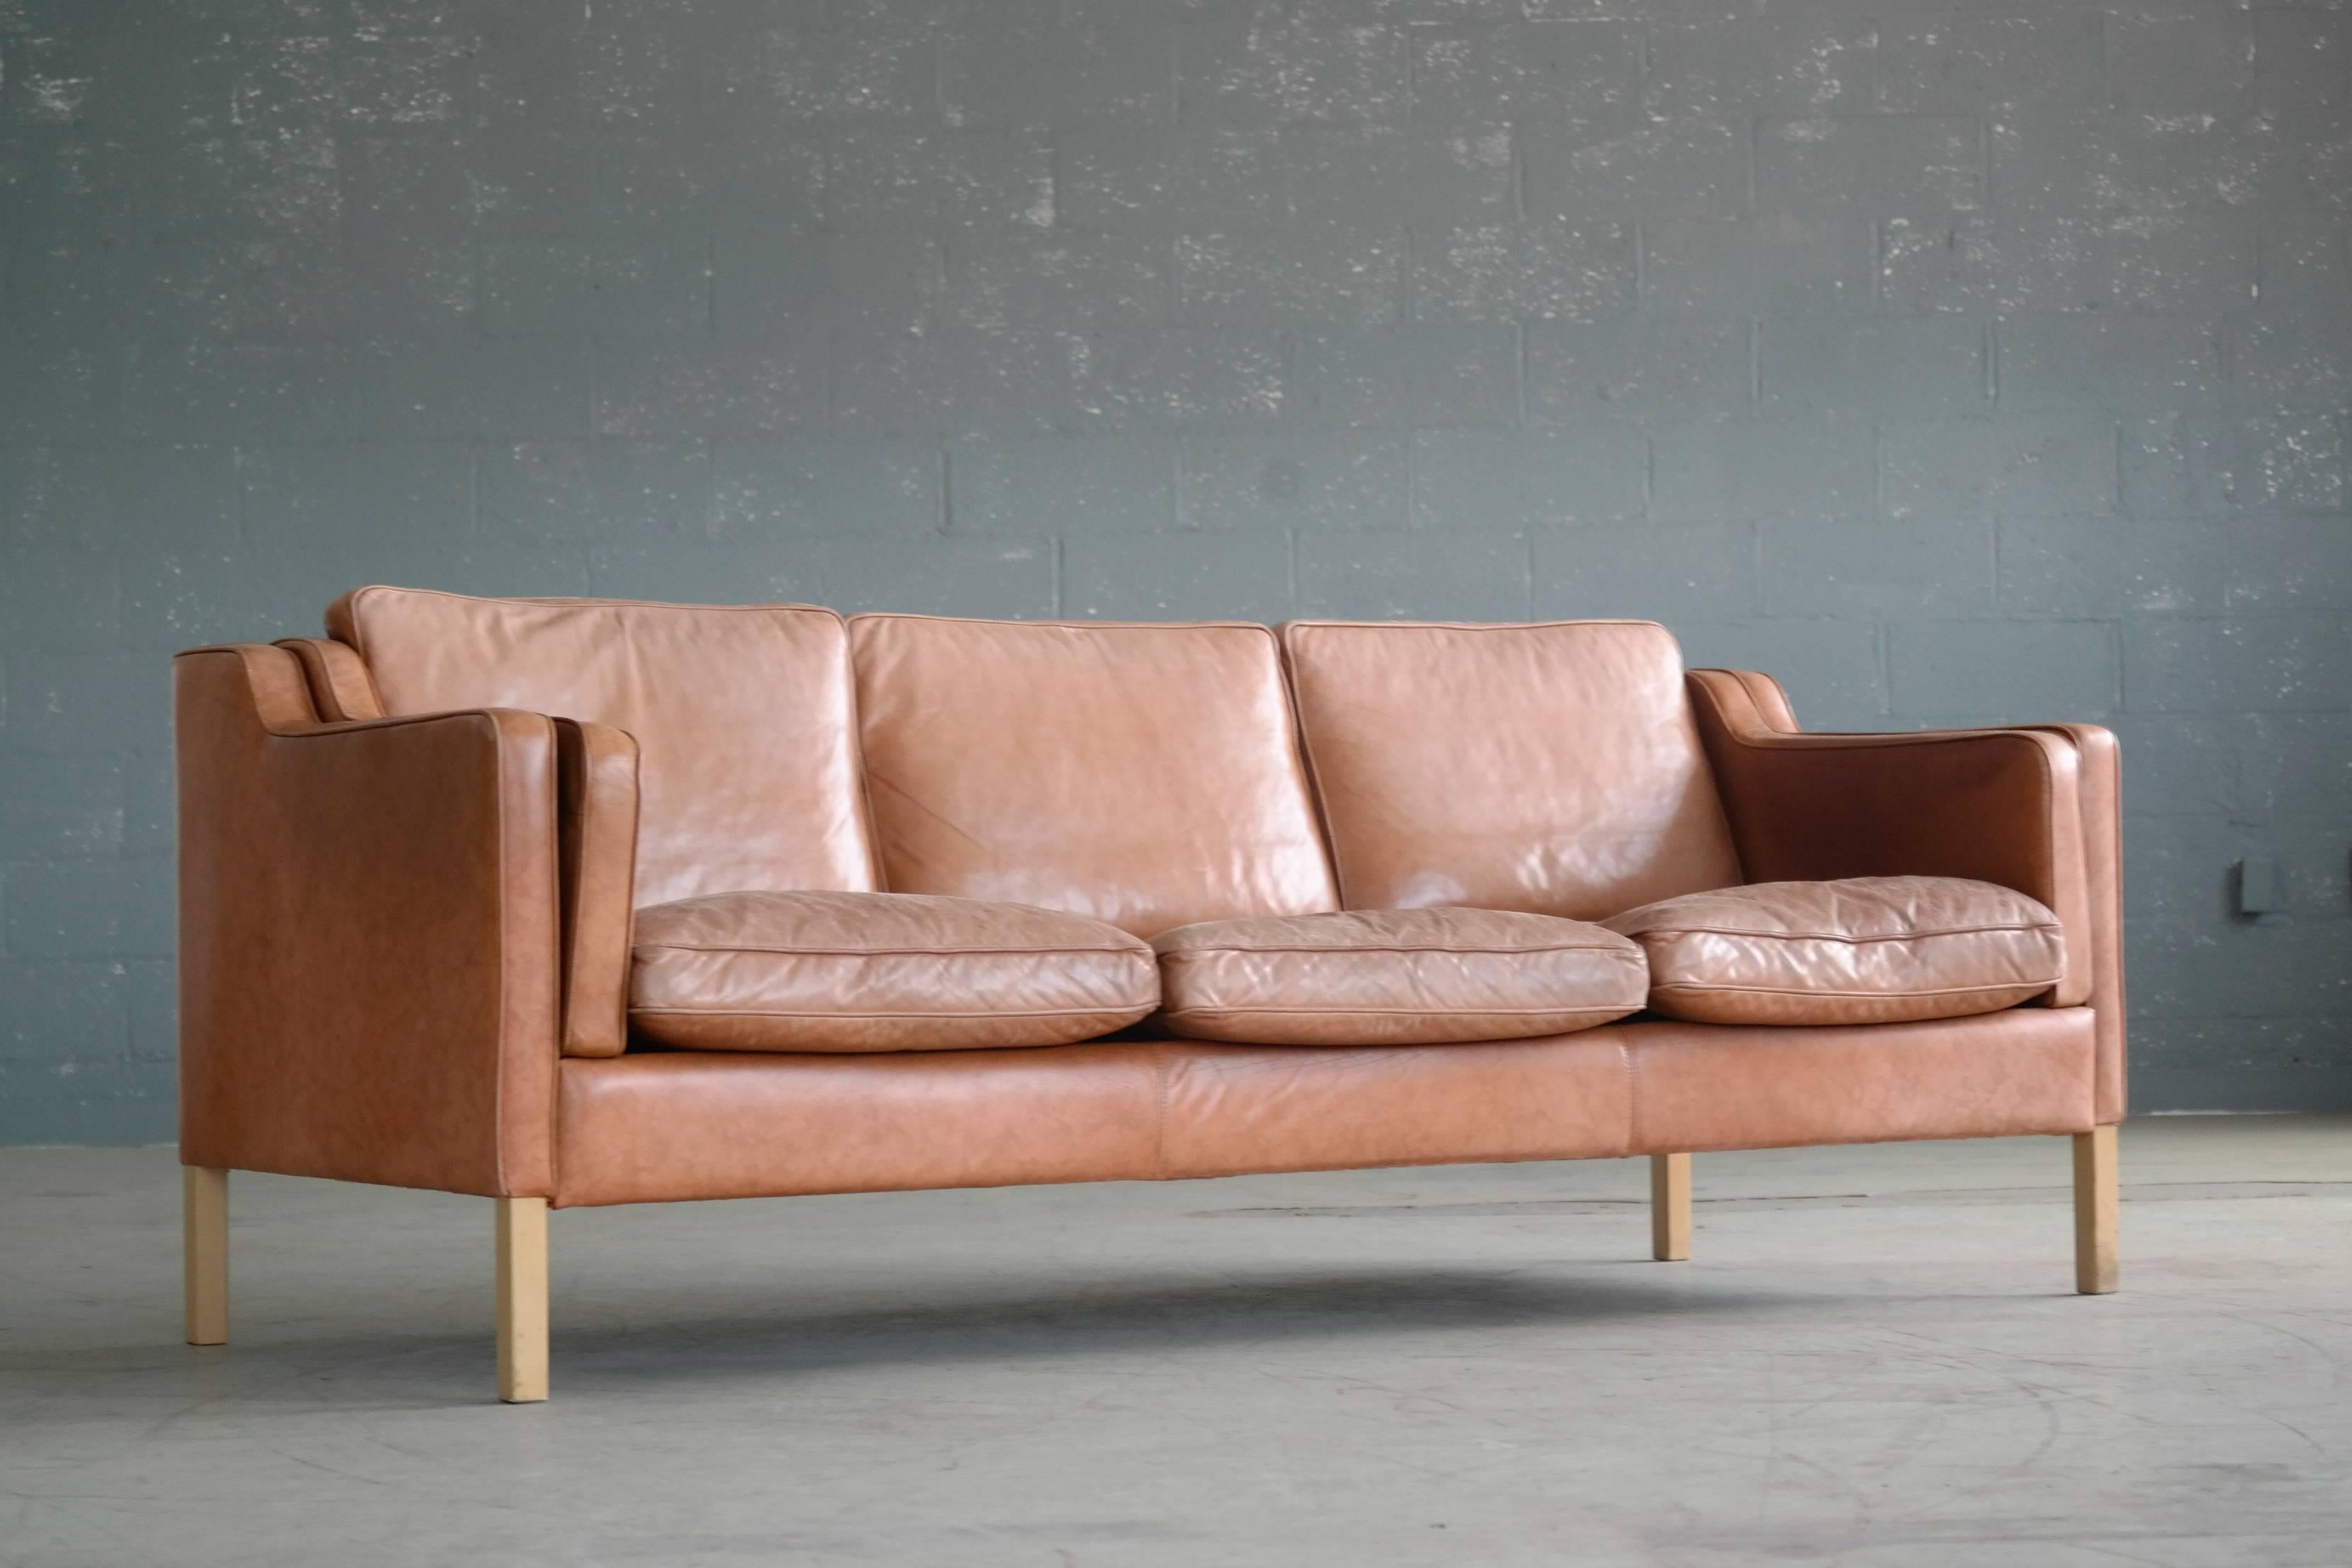 Classic Børge Mogensen model 2213 style London sofa in light cognac colored leather by Stouby Mobler and designed in 1968. Highest quality craftsmanship upholstered in aniline leather. Some sun fading of the color and just the right amount of patina